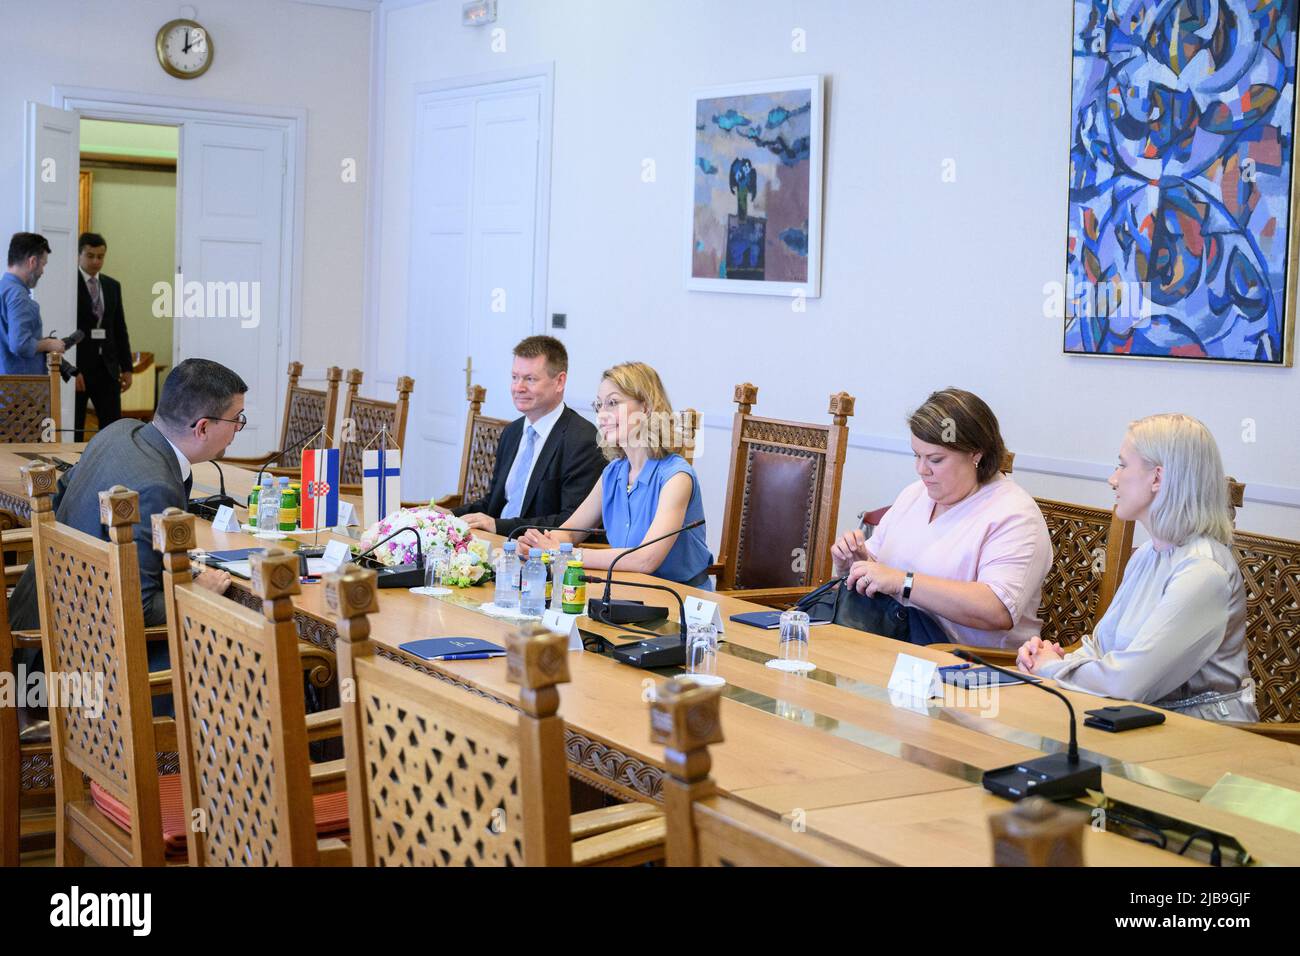 Zagreb, Croatia. 04th June, 2022. Finnish minister Tytti Tuppurainen met for discussions with Croatian State Secretary for Europe Andreja Metelko-Zgombic and Chair of the European Affairs Committee of the Croatian Parliament Domagoj Hajdukovic in Zagreb on June 4, 2022. Topics on the agenda during the visit included the war launched by Russia and assistance to Ukraine, EU enlargement prospects in the Western Balkans, Finland’s NATO membership process, and Croatia’s accession to the Schengen area and adoption of the euro. Photo: Davor Puklavec/PIXSELL Credit: Sandra Krunic/Alamy Live News Stock Photo